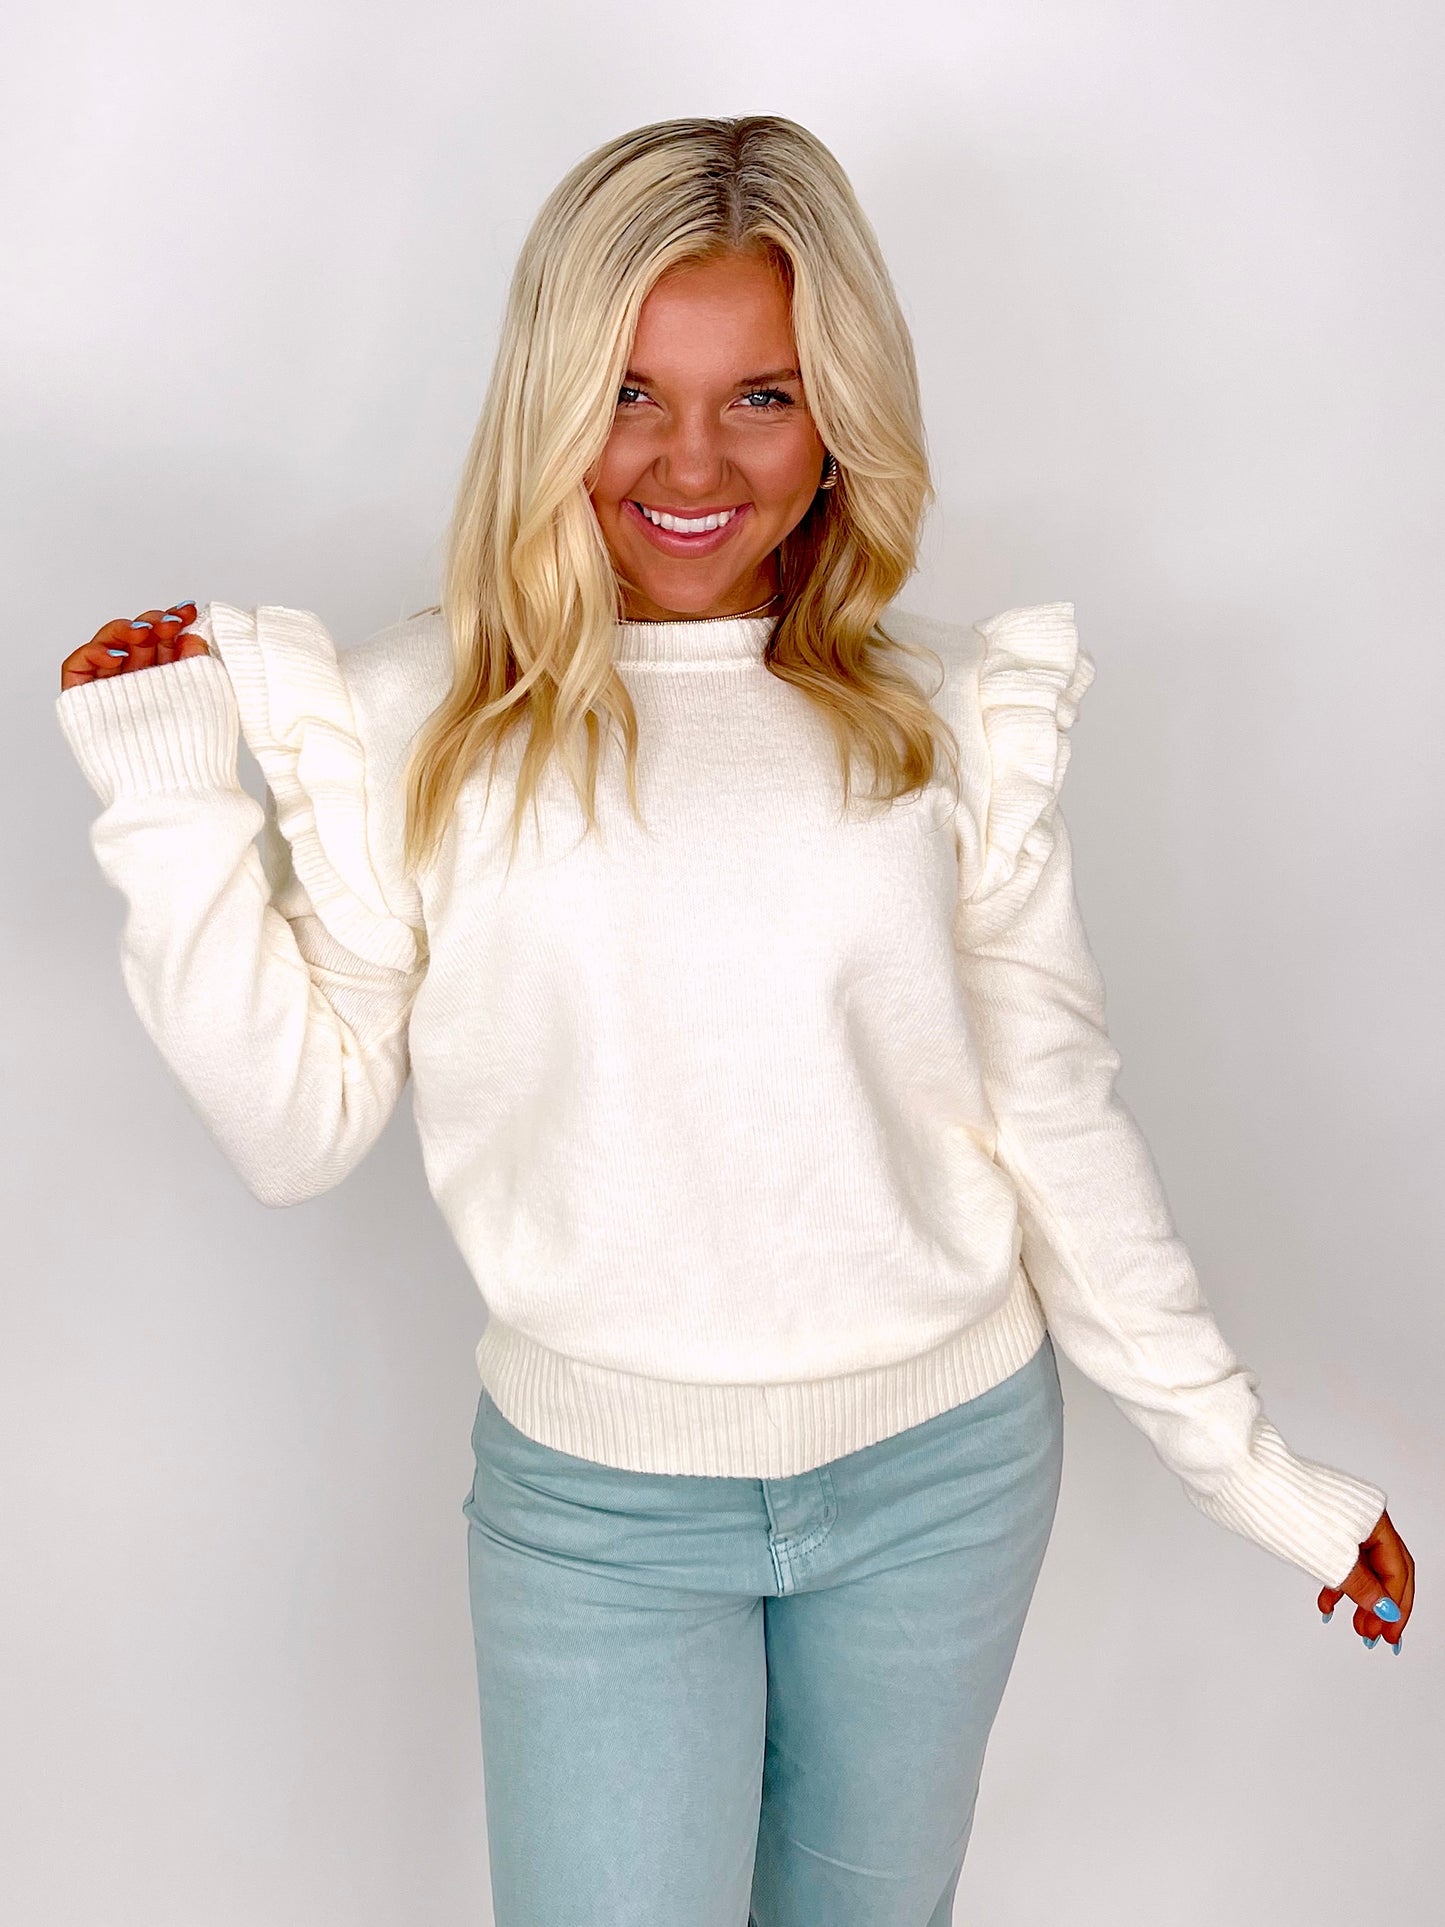 The Juliette Sweater-Sweaters-Jodifl-The Village Shoppe, Women’s Fashion Boutique, Shop Online and In Store - Located in Muscle Shoals, AL.